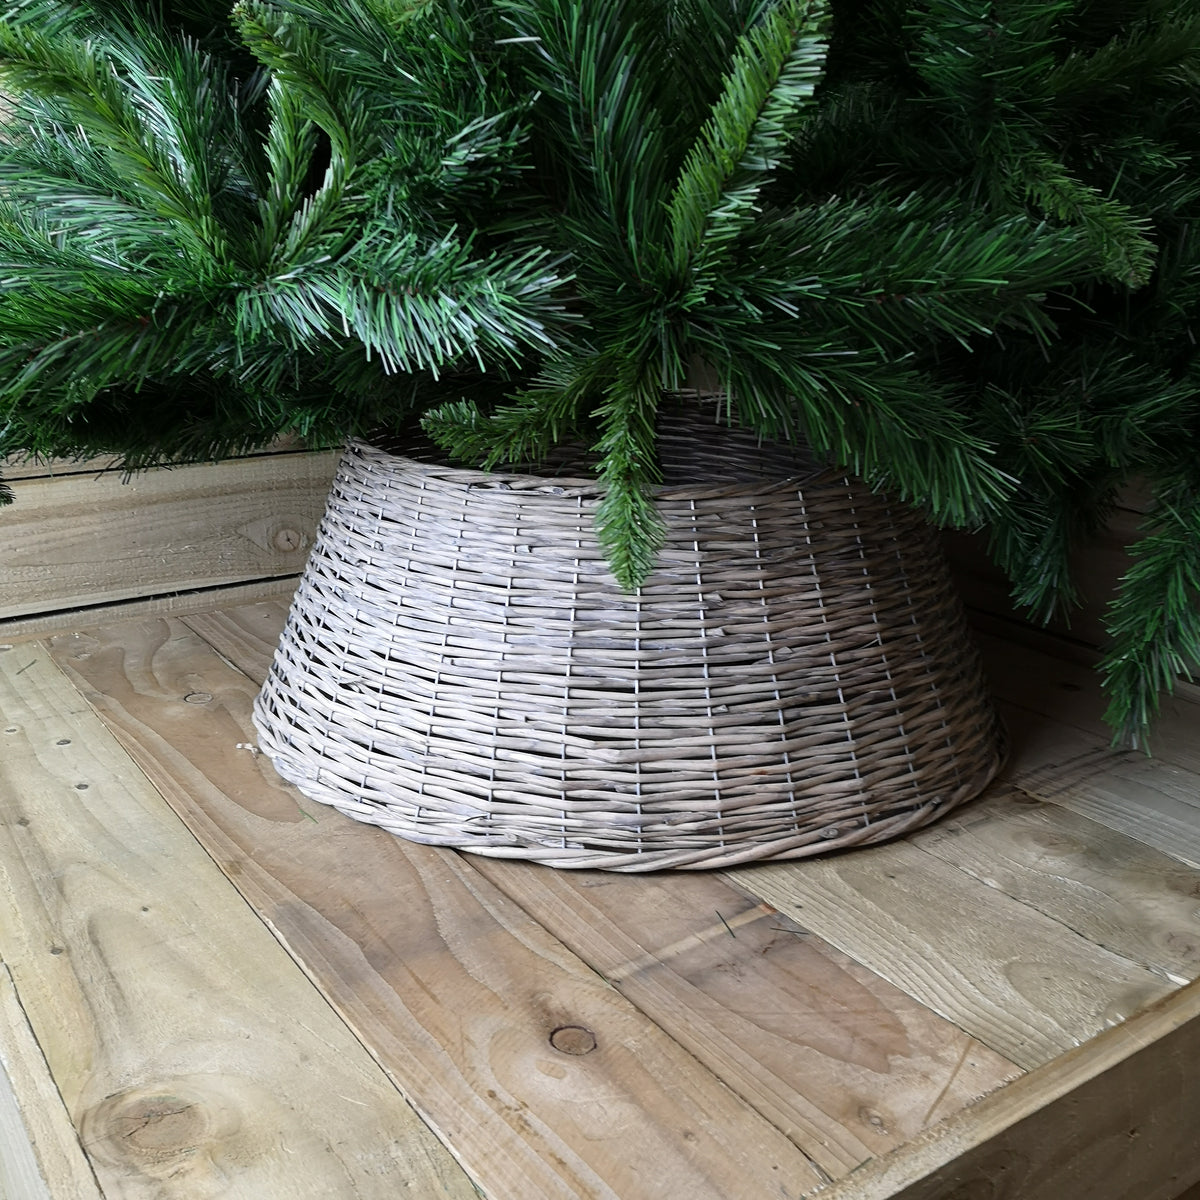 70CM X 28CM Willow Wicker Tree Skirt In Grey Wash Colour